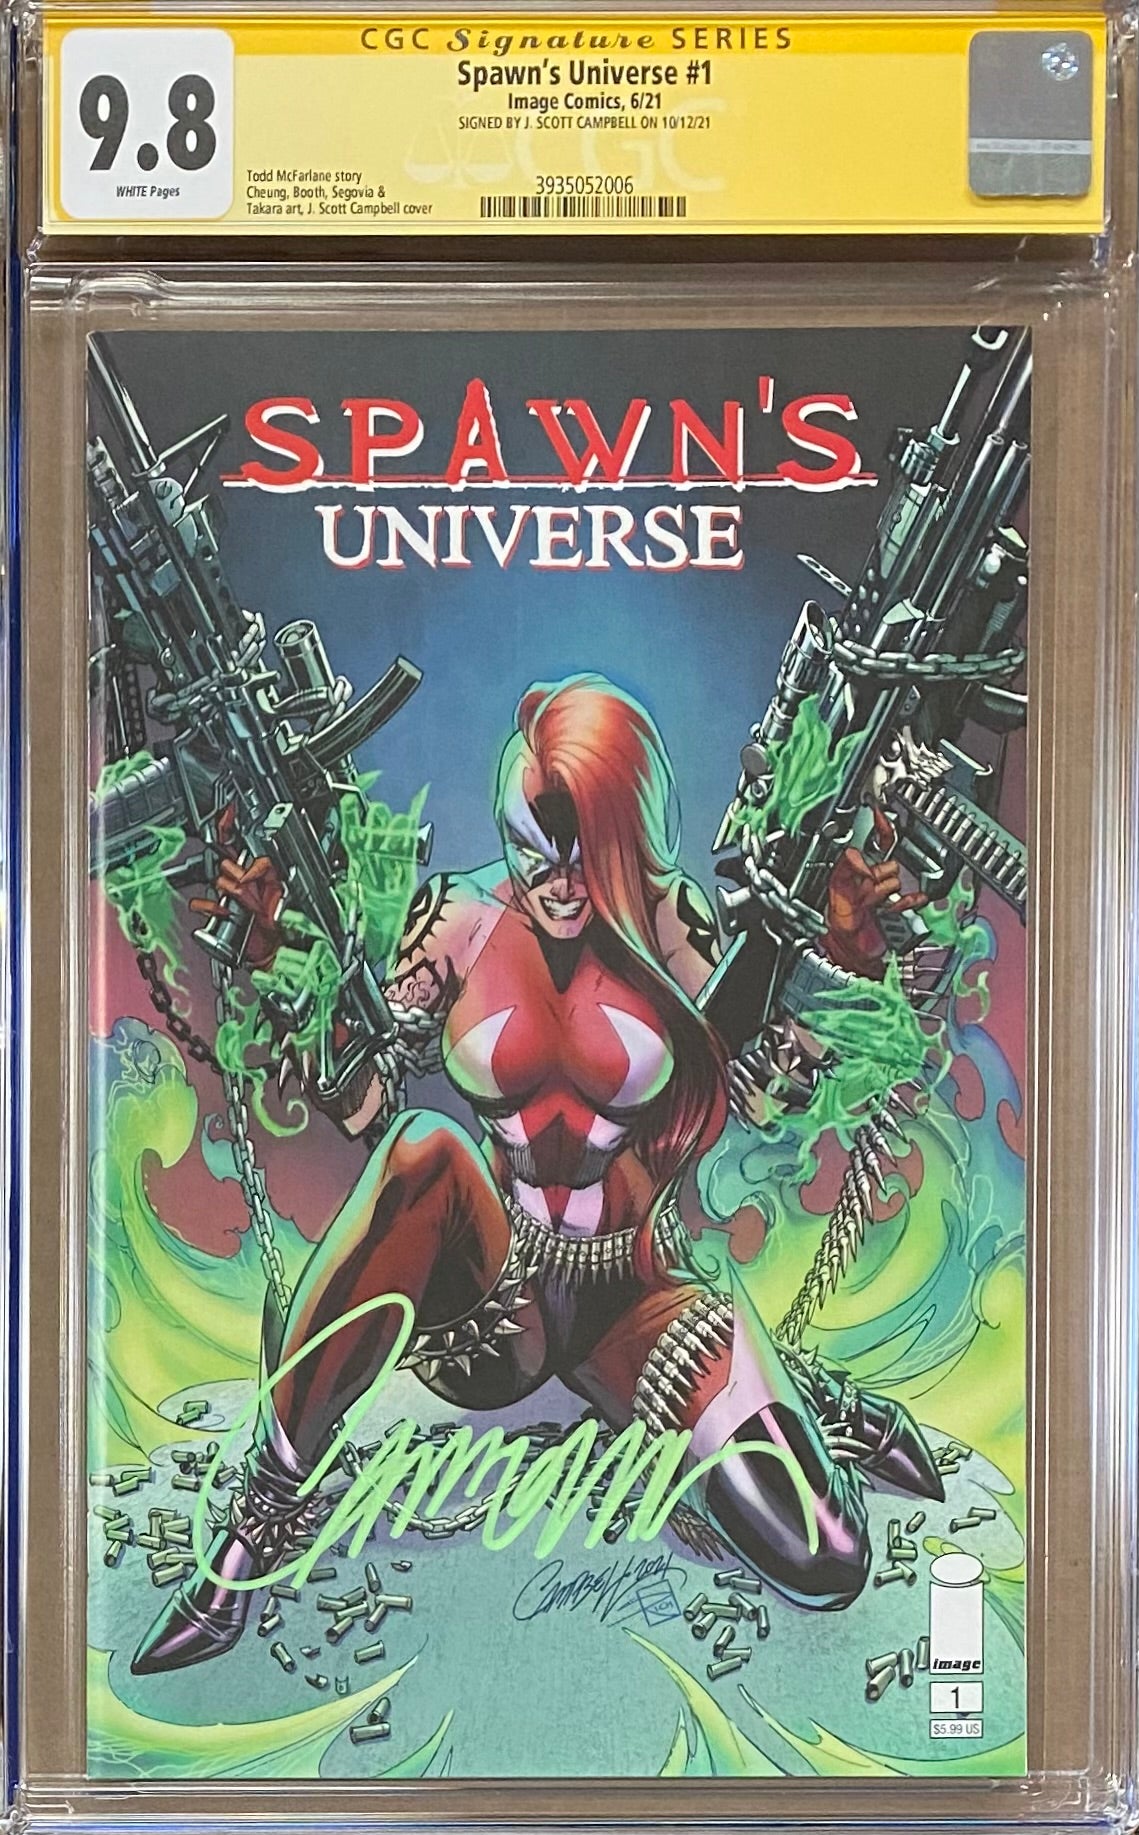 Spawn's Universe #1 Cover A - Campbell "She-Spawn" CGC 9.8 SS